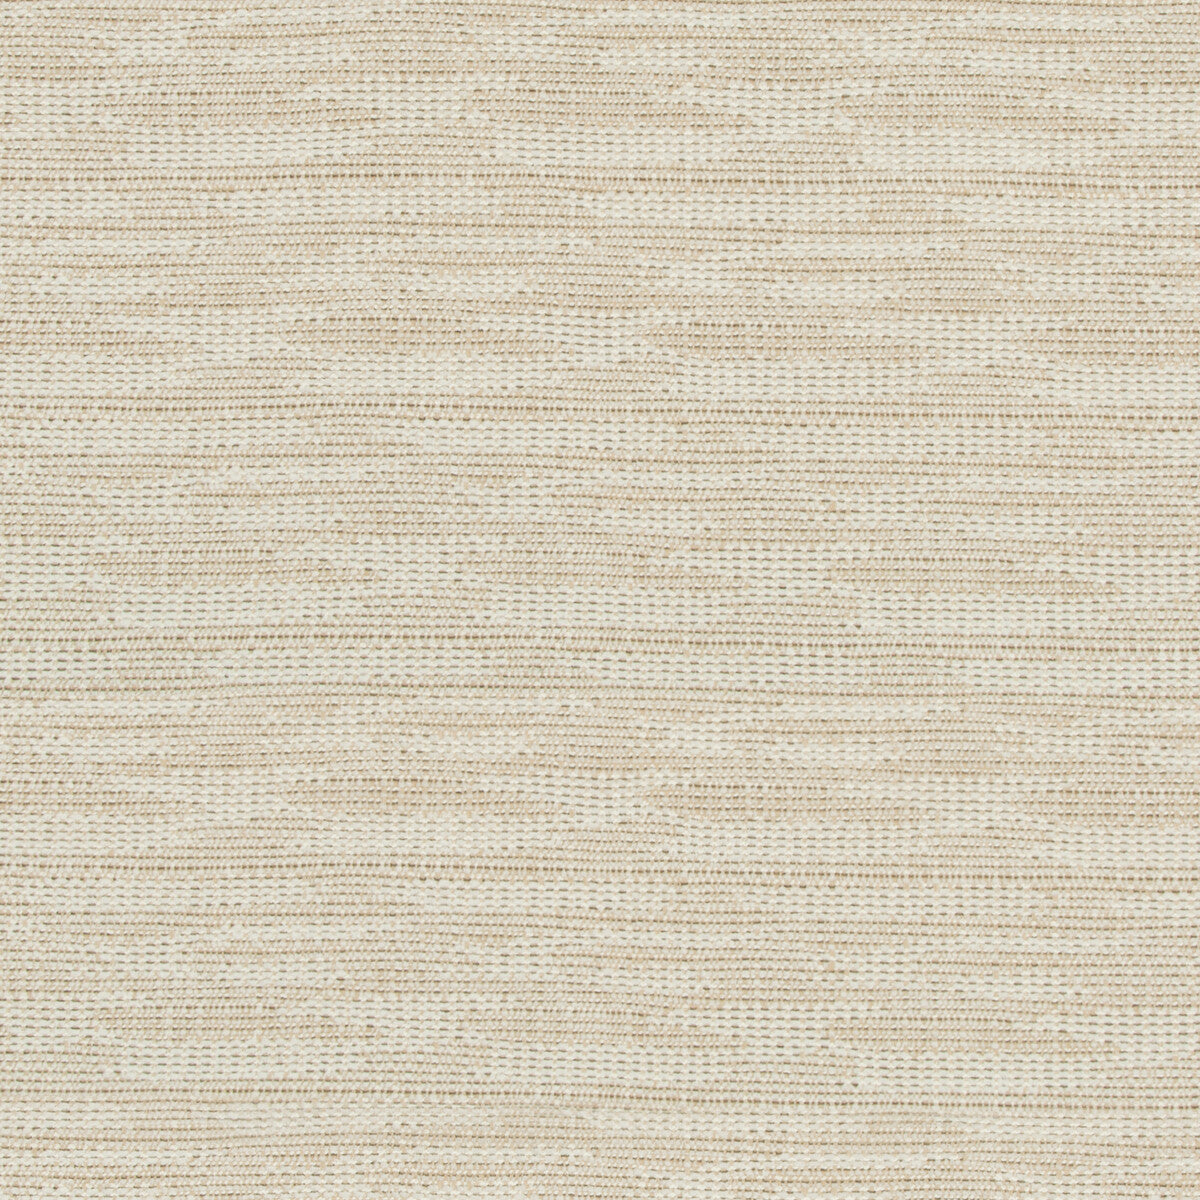 Playa fabric in beach color - pattern GWF-3744.116.0 - by Lee Jofa Modern in the Kw Terra Firma II Indoor Outdoor collection